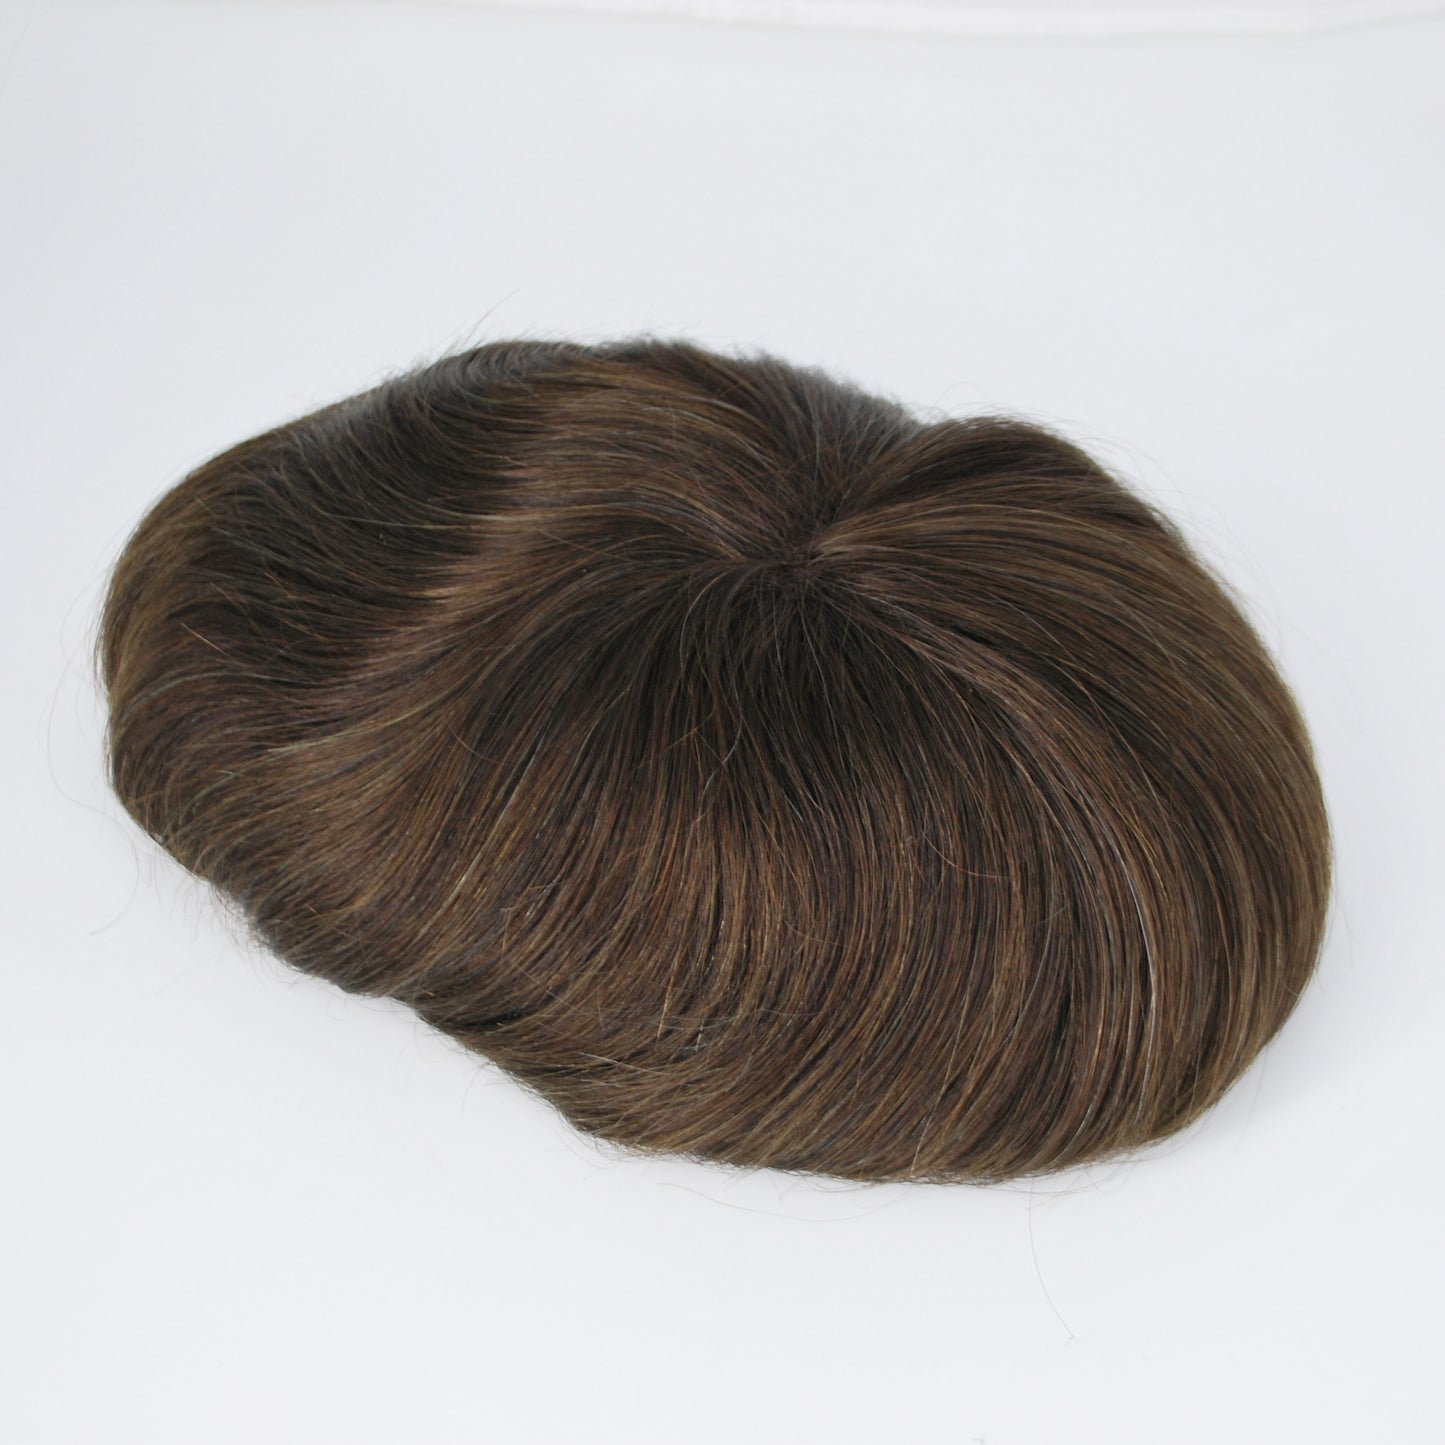 Clearance toupee #3 ash brown durable welded mono with PU around 8.5x5.75 inch men hair replacement wig